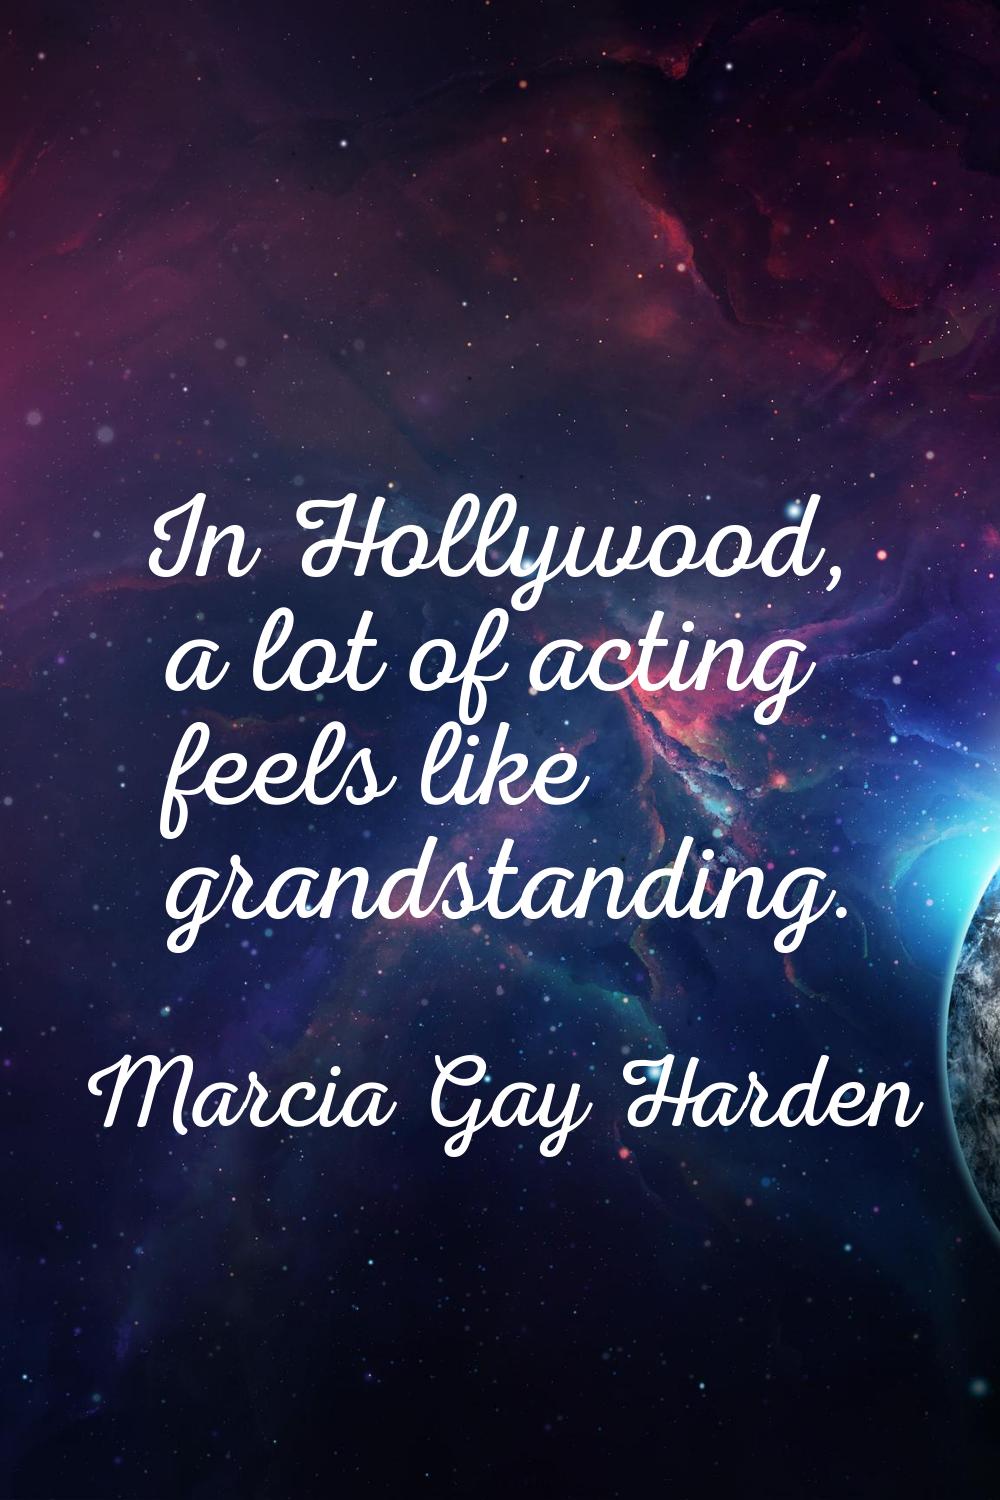 In Hollywood, a lot of acting feels like grandstanding.